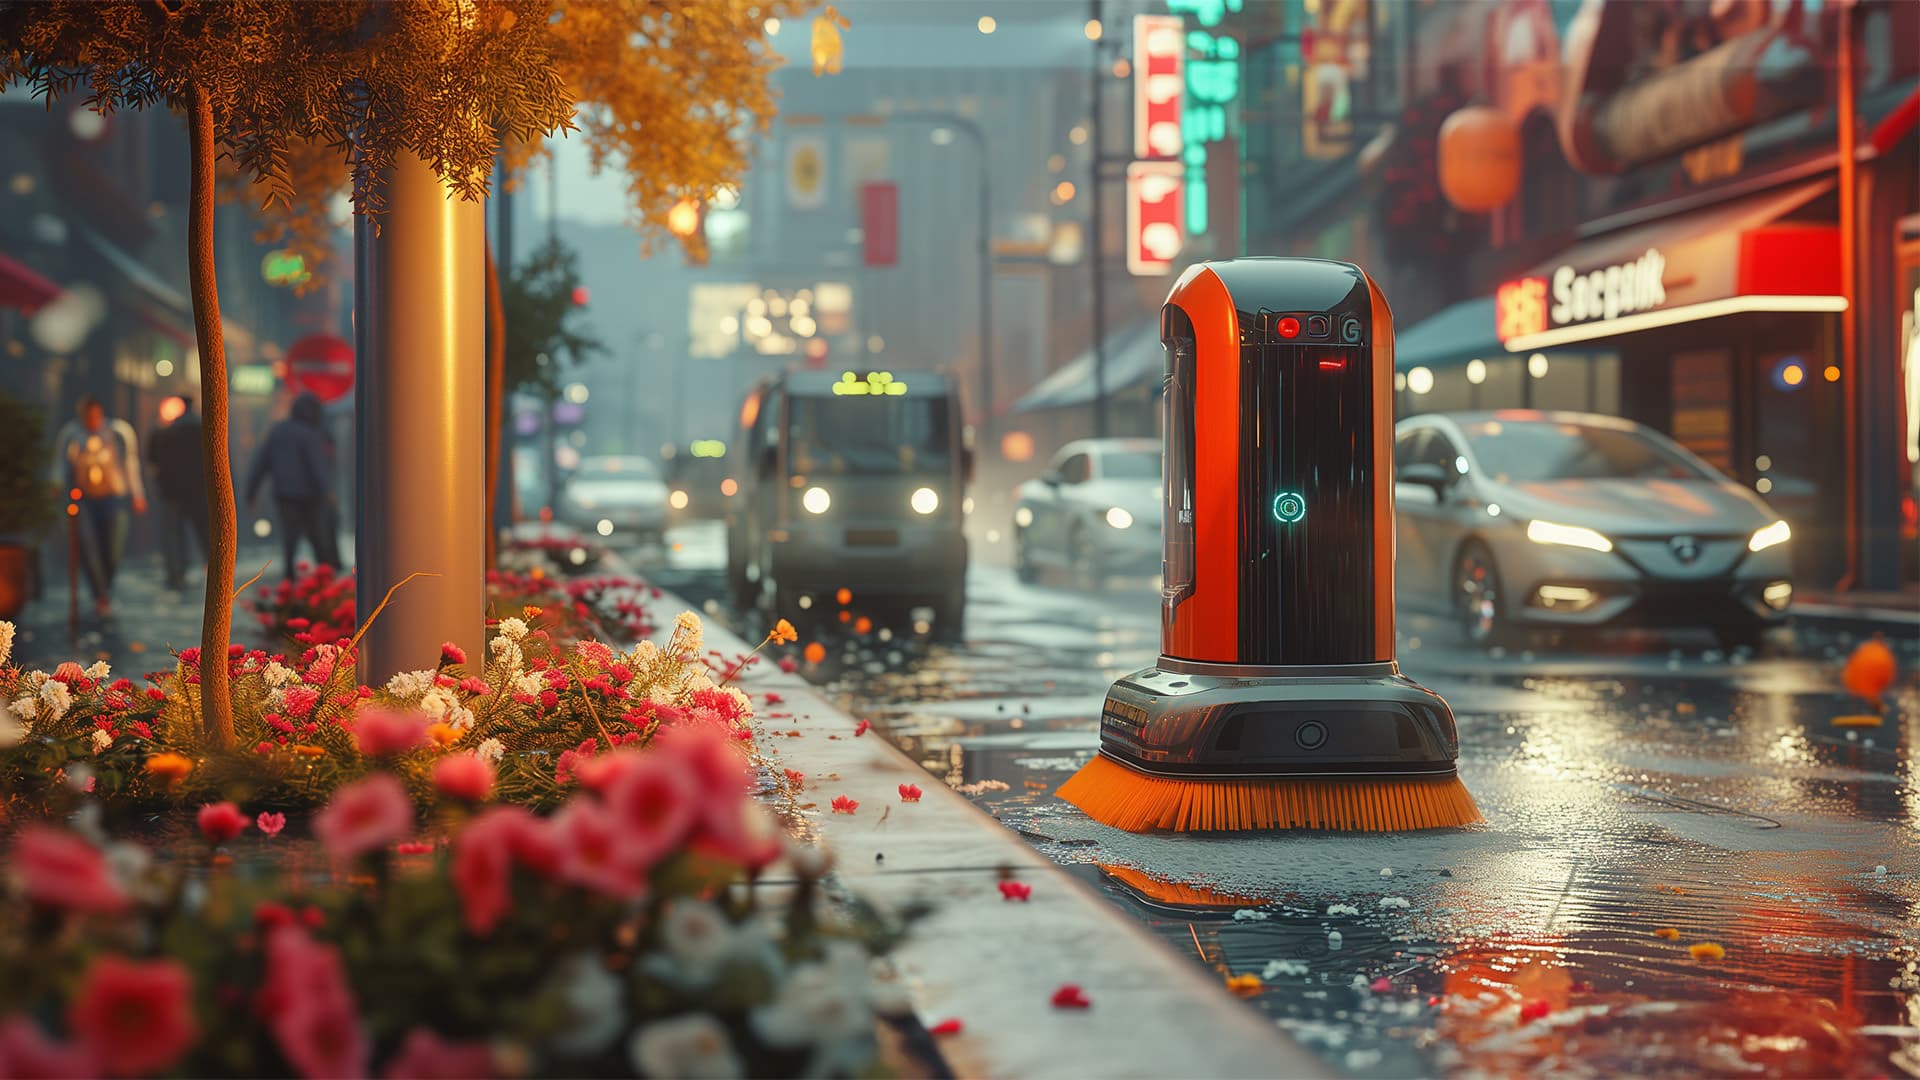 Street cleaning robot working in a vibrant city to collect debris from the road